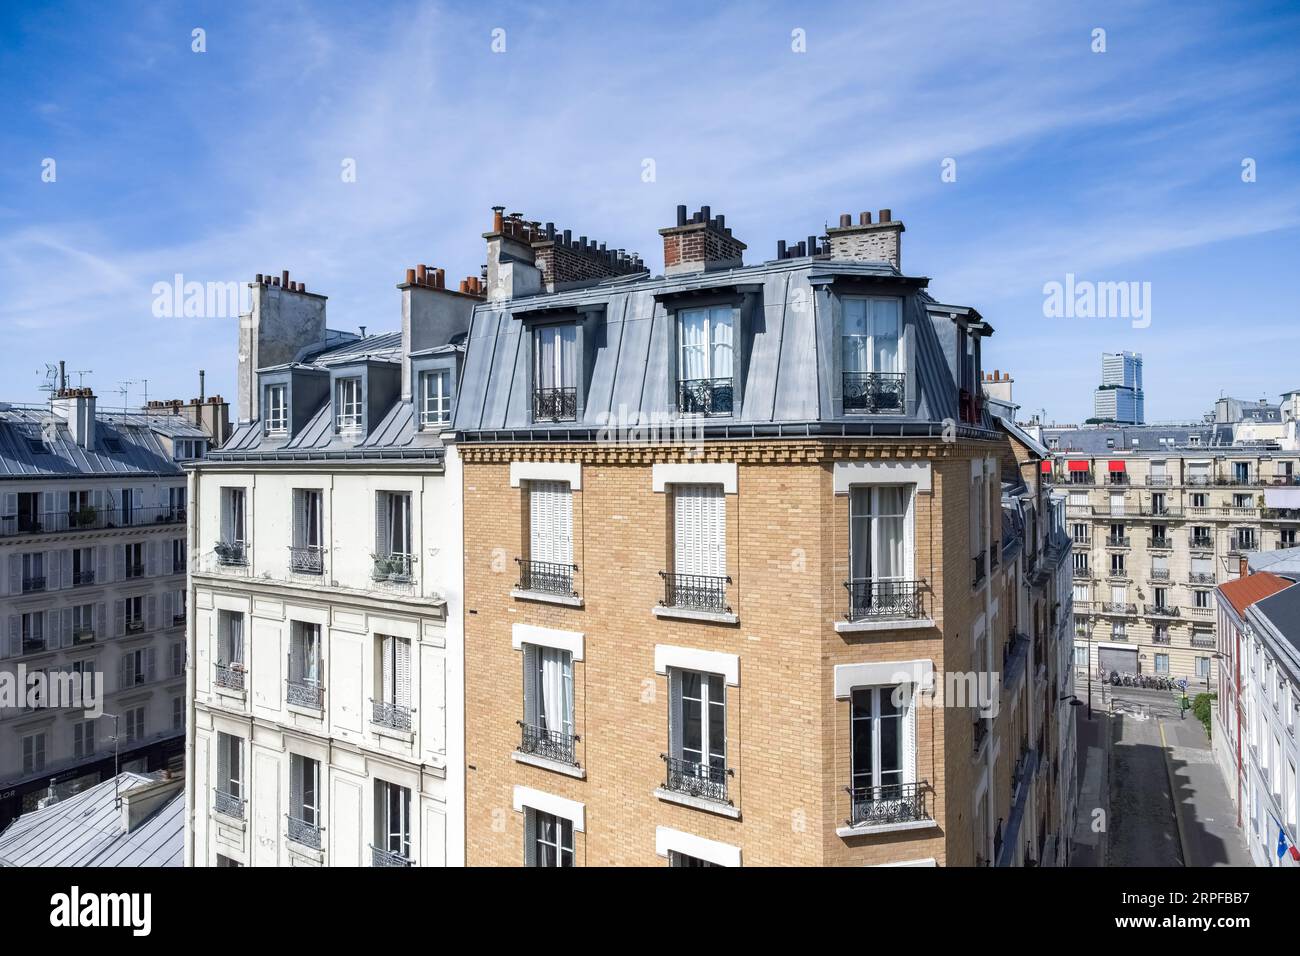 Paris, typical facades, and the new courthouse, the Palais de justice in background Stock Photo